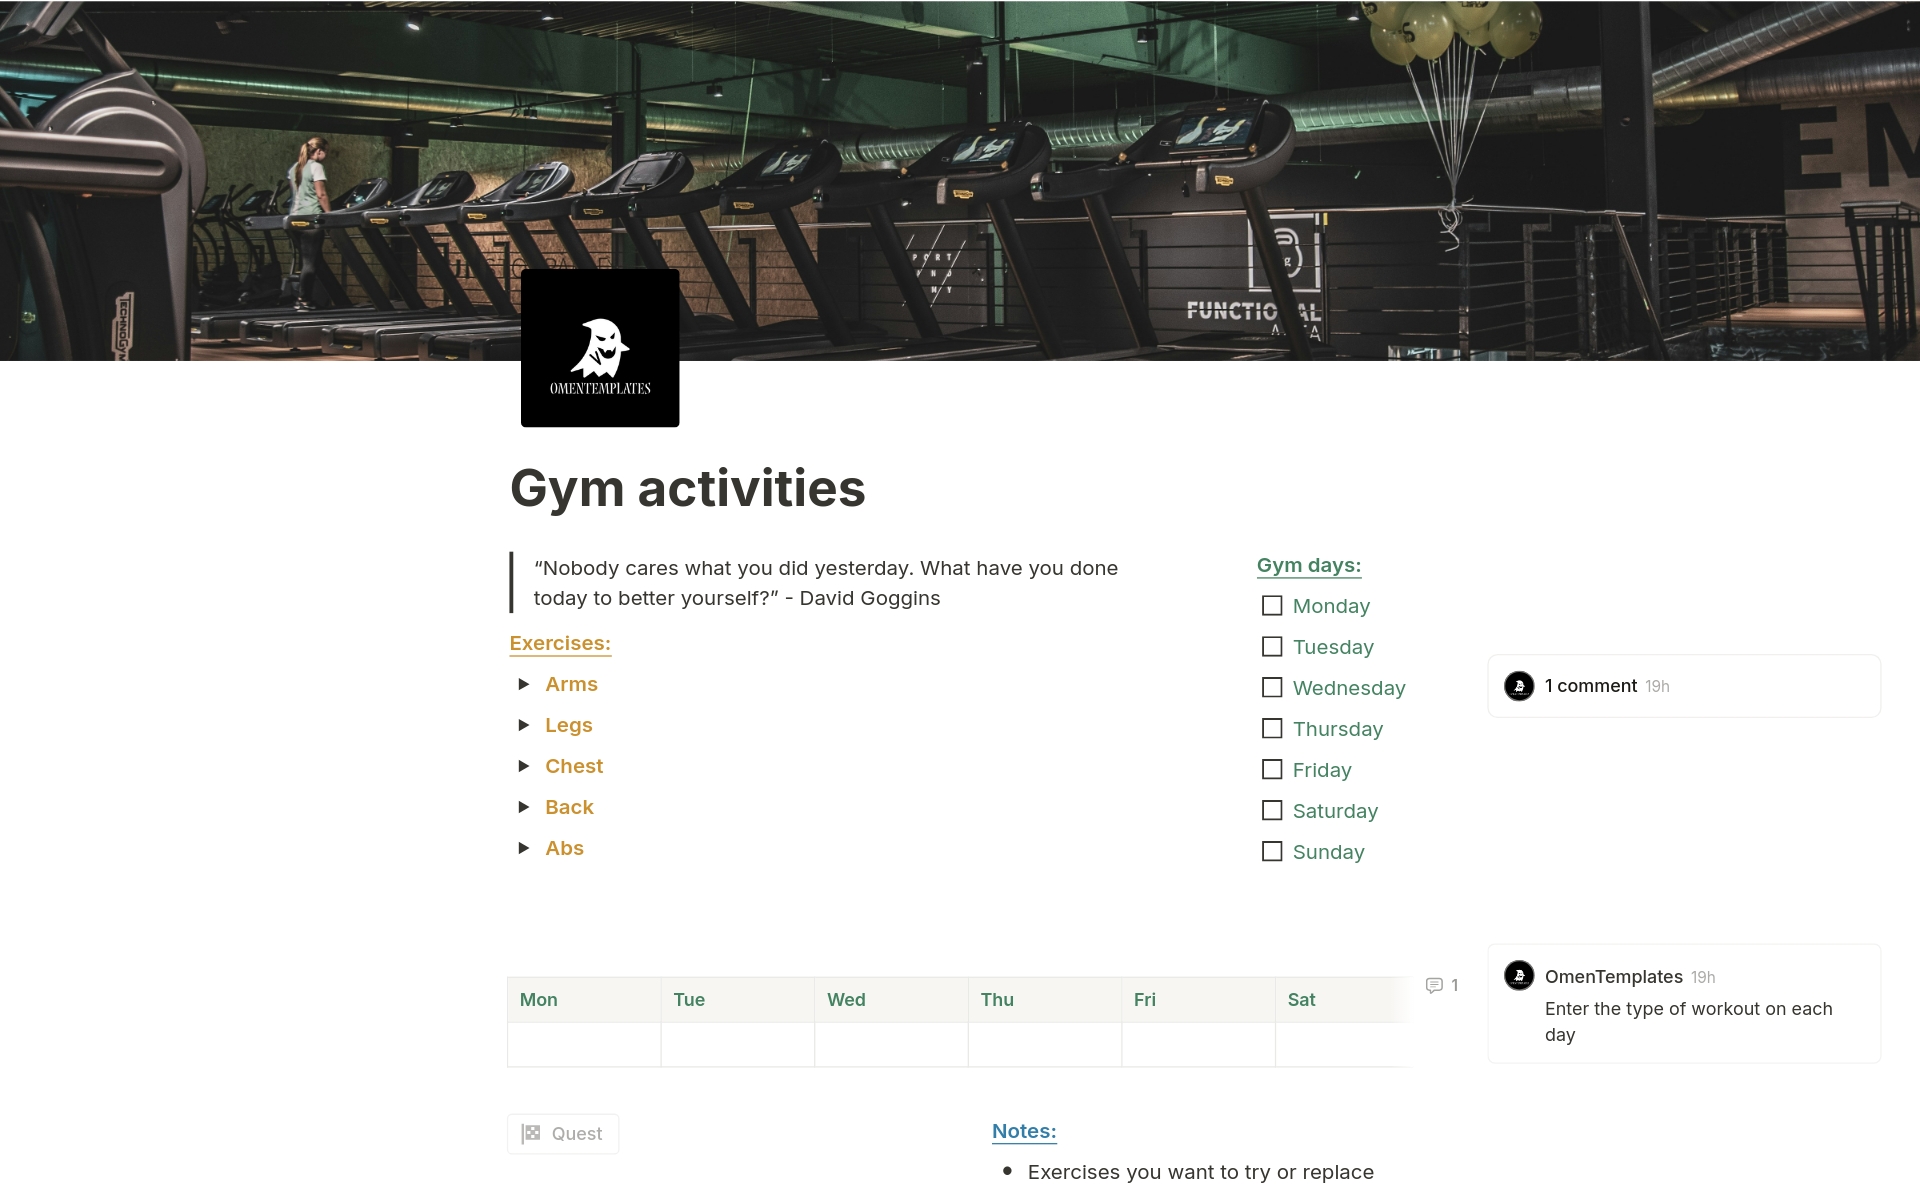 You can use this Notion template to track your gym activities. It helps you to optimize your training.